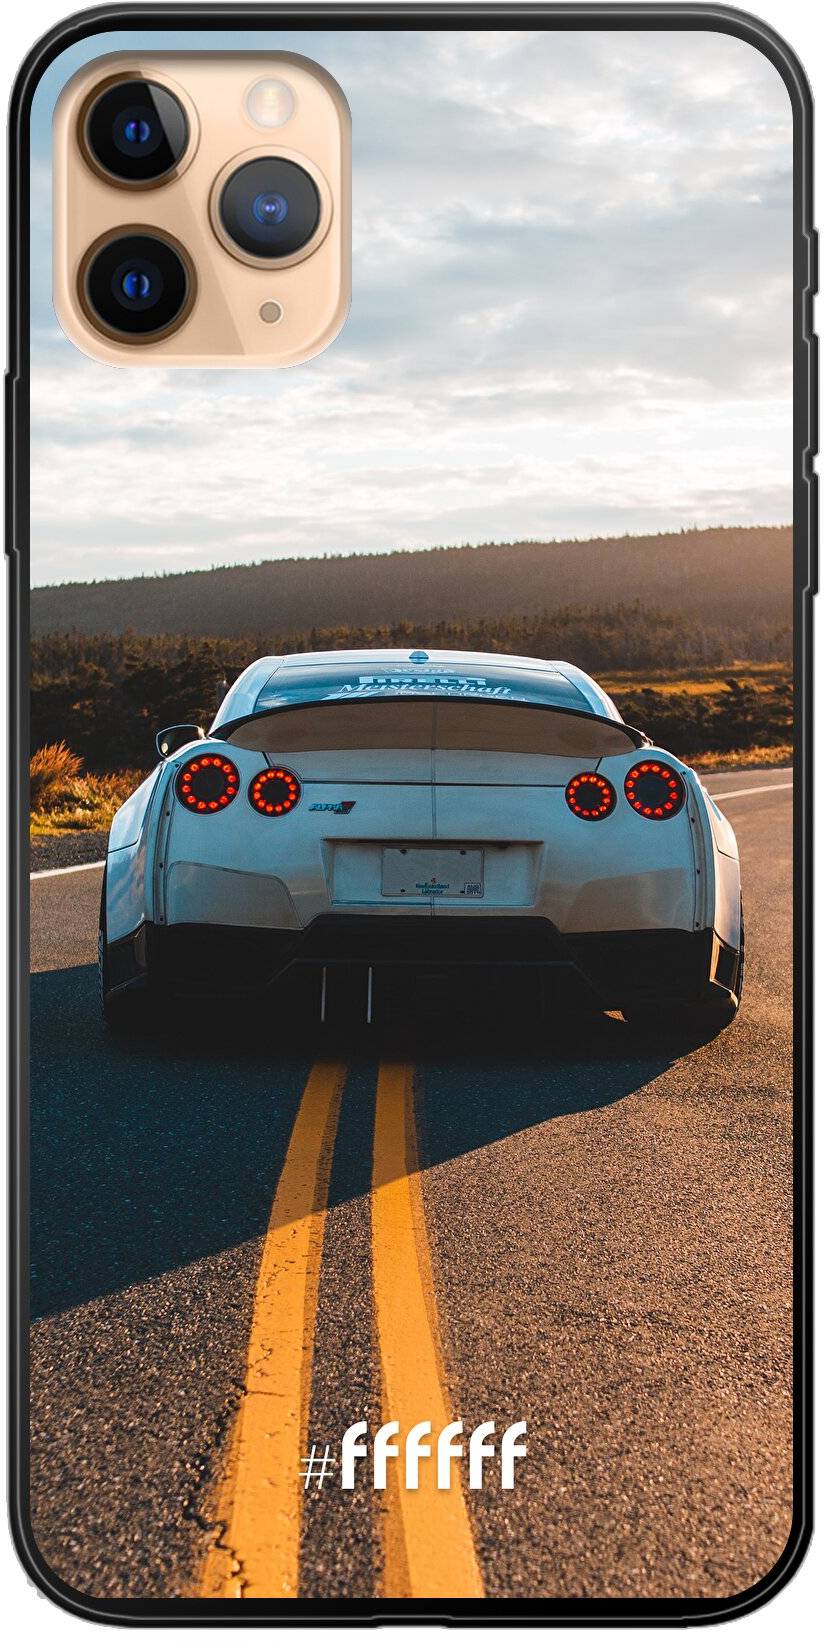 Silver Sports Car iPhone 11 Pro Max